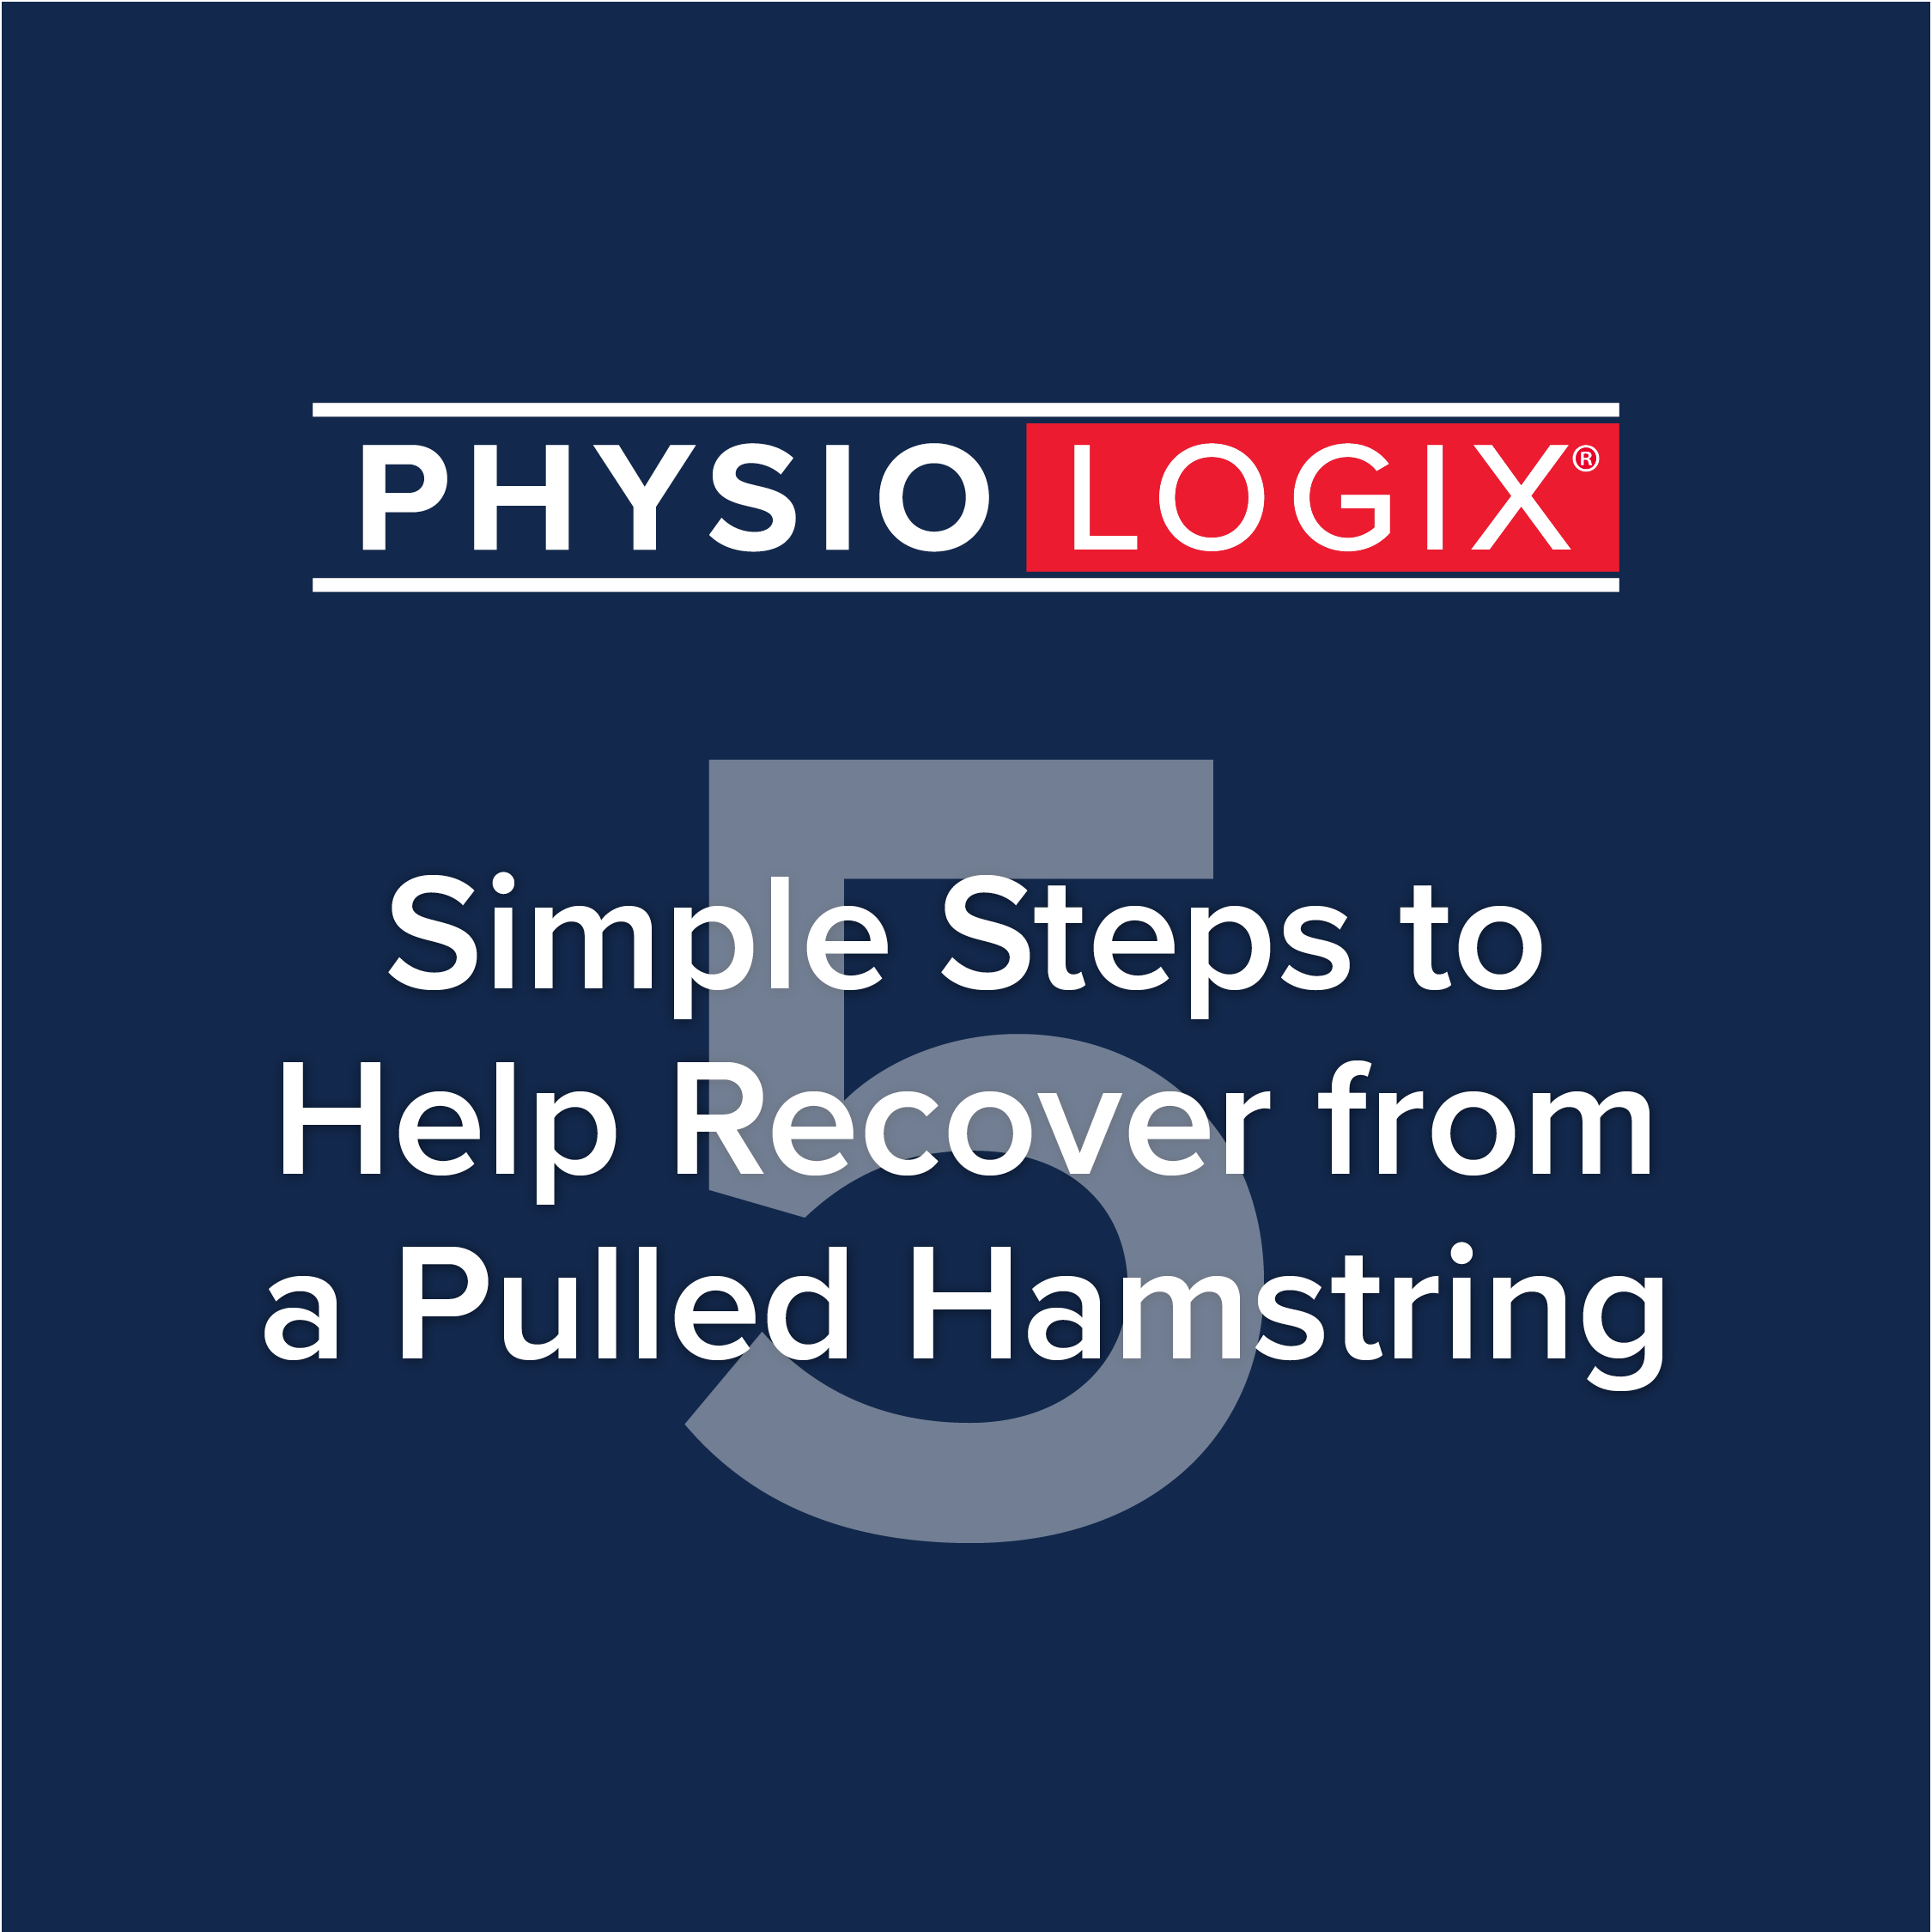 5 Simple Steps to Help Recover from a Pulled Hamstring